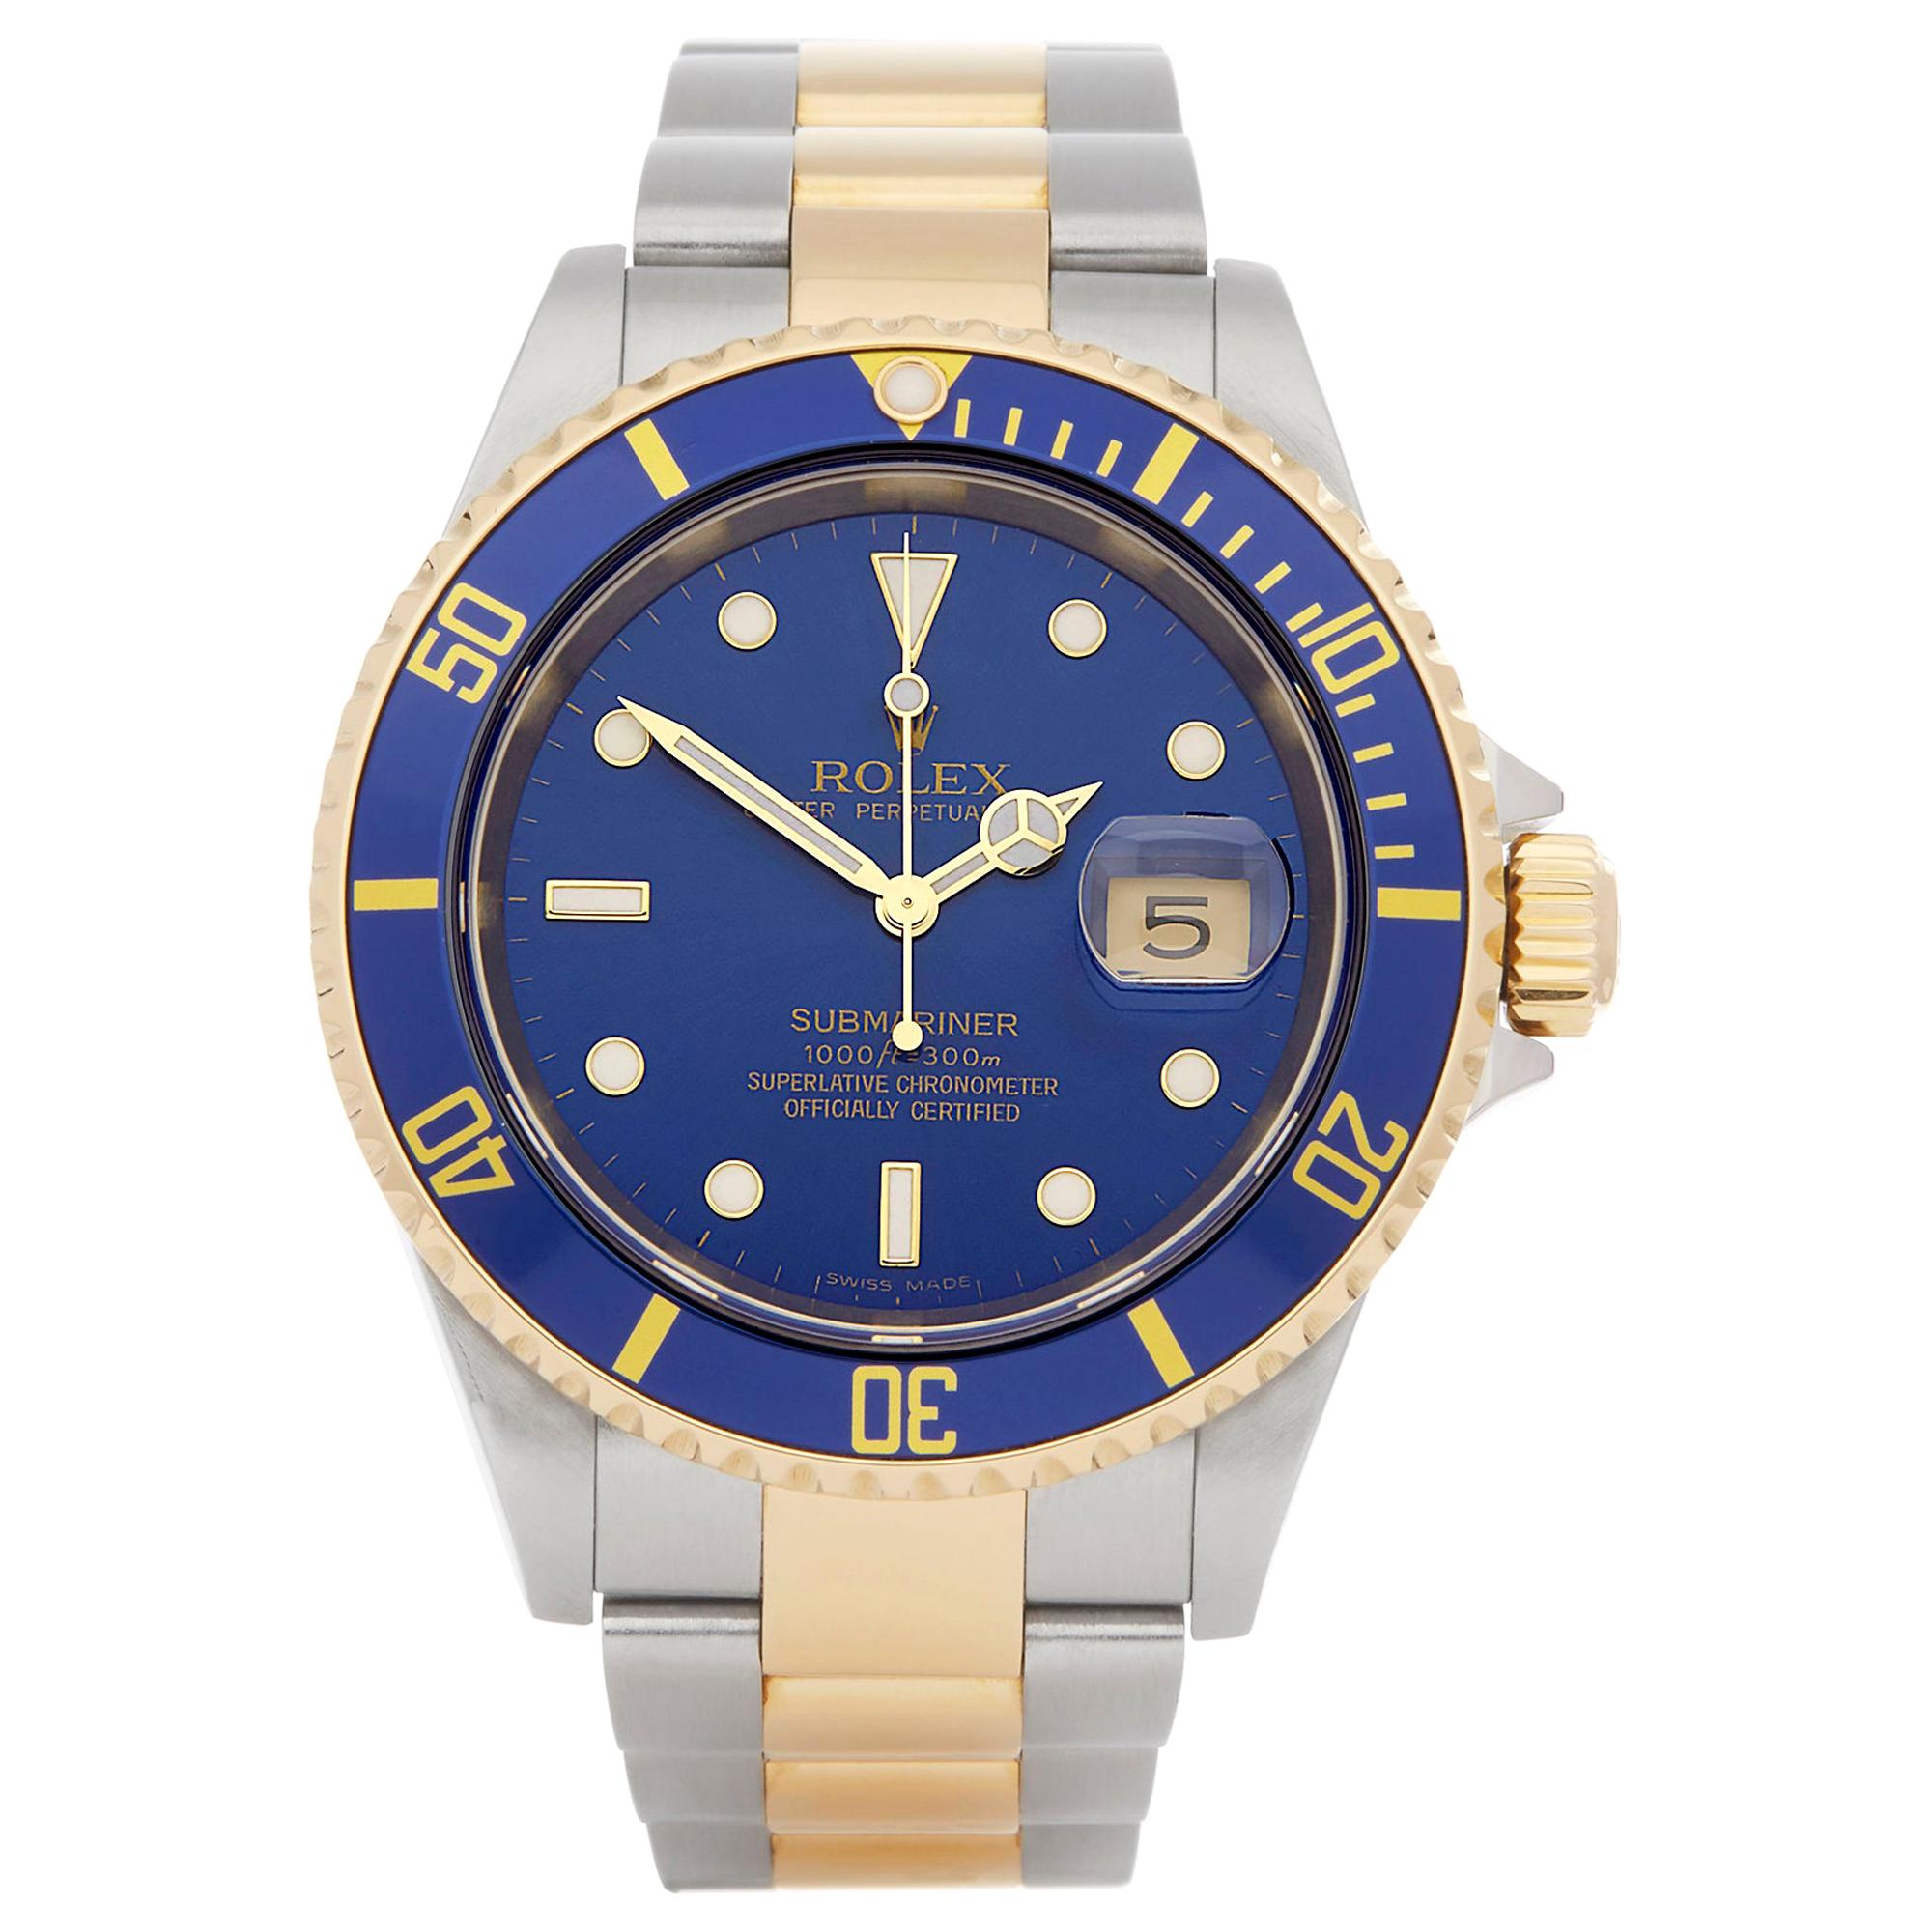 Rolex Submariner Date Stainless Steel and Yellow Gold 16613